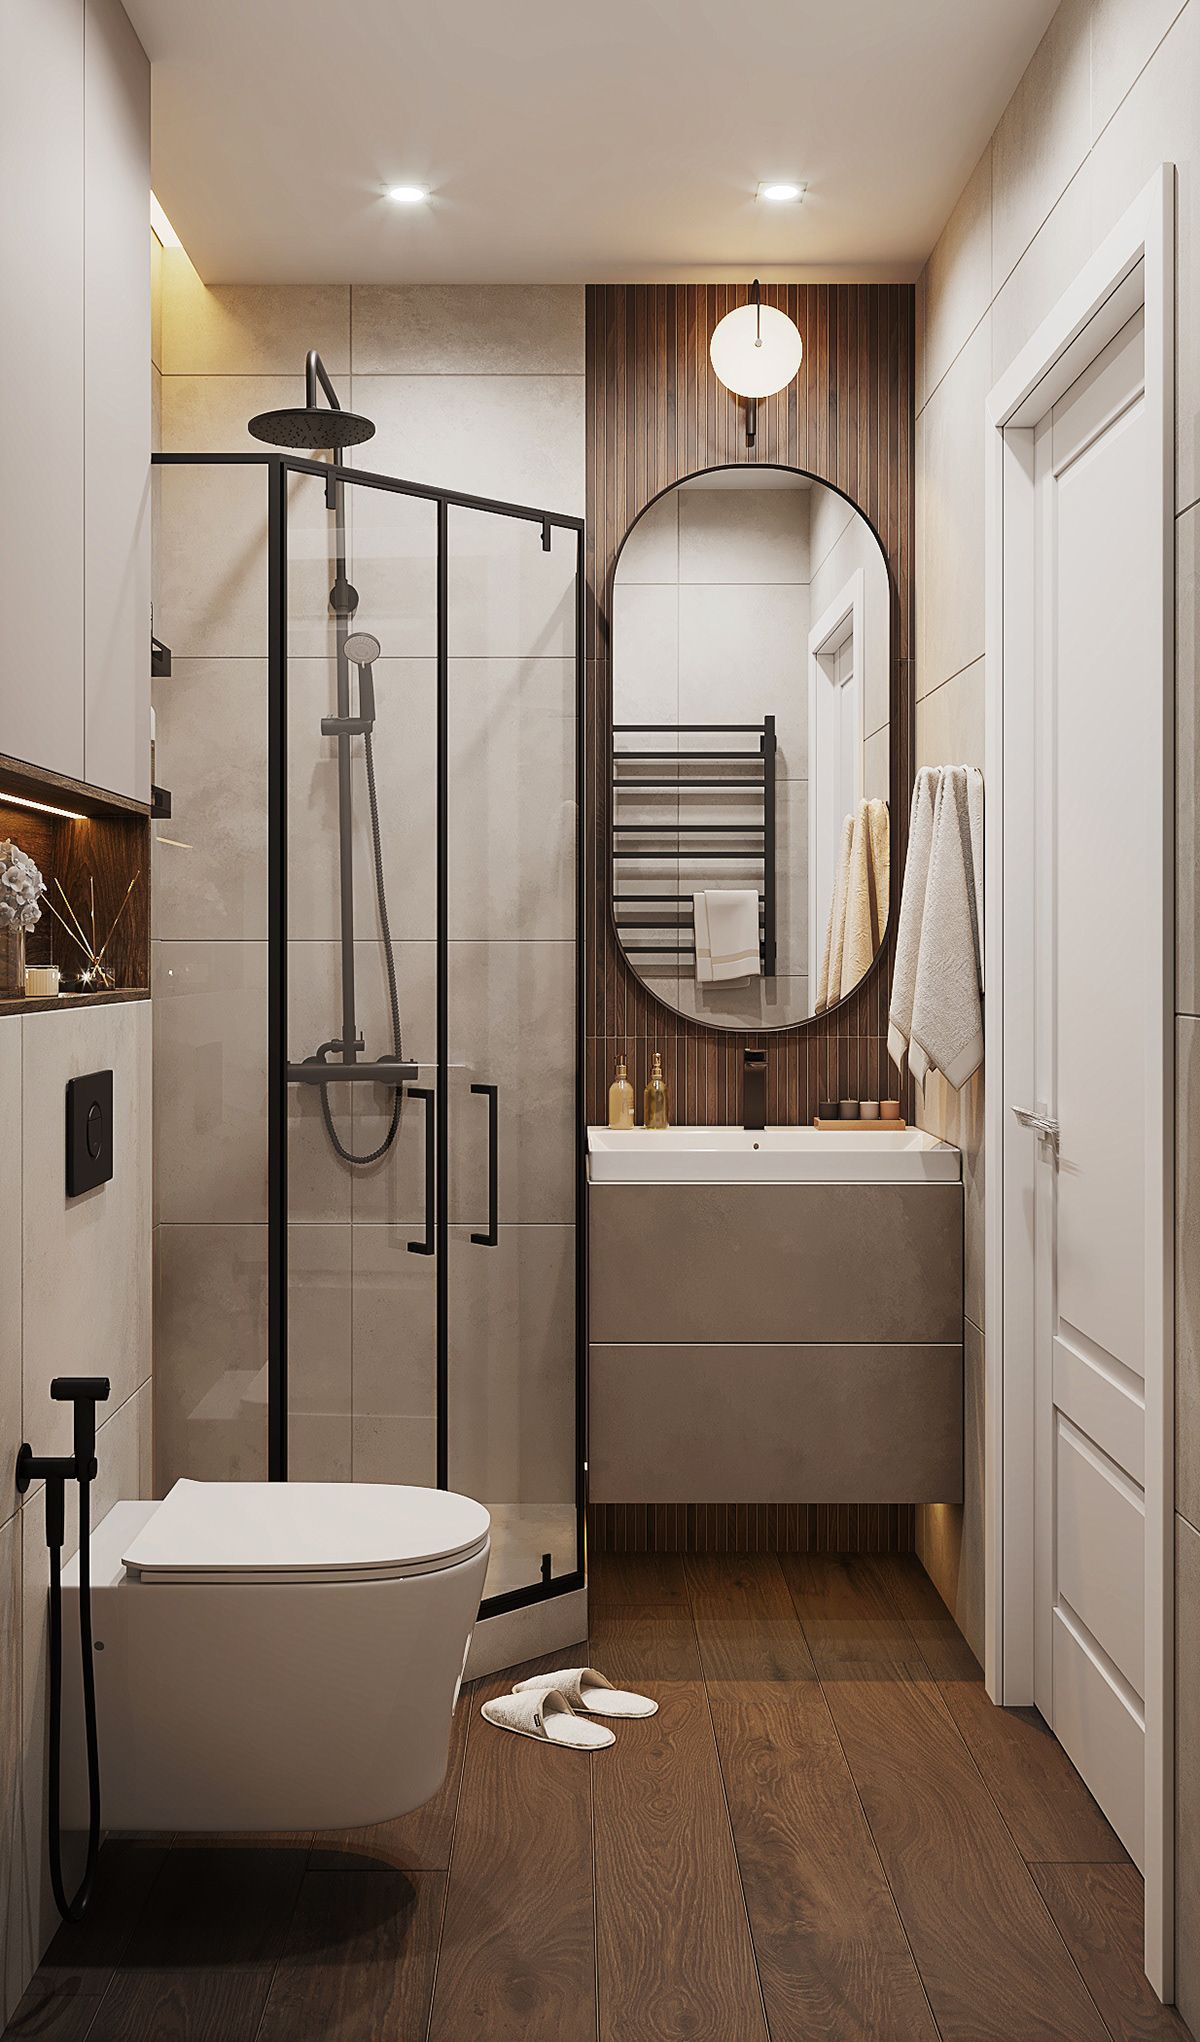 Bathroom Toilet: Stylish and Functional Fixtures for Your Bathroom